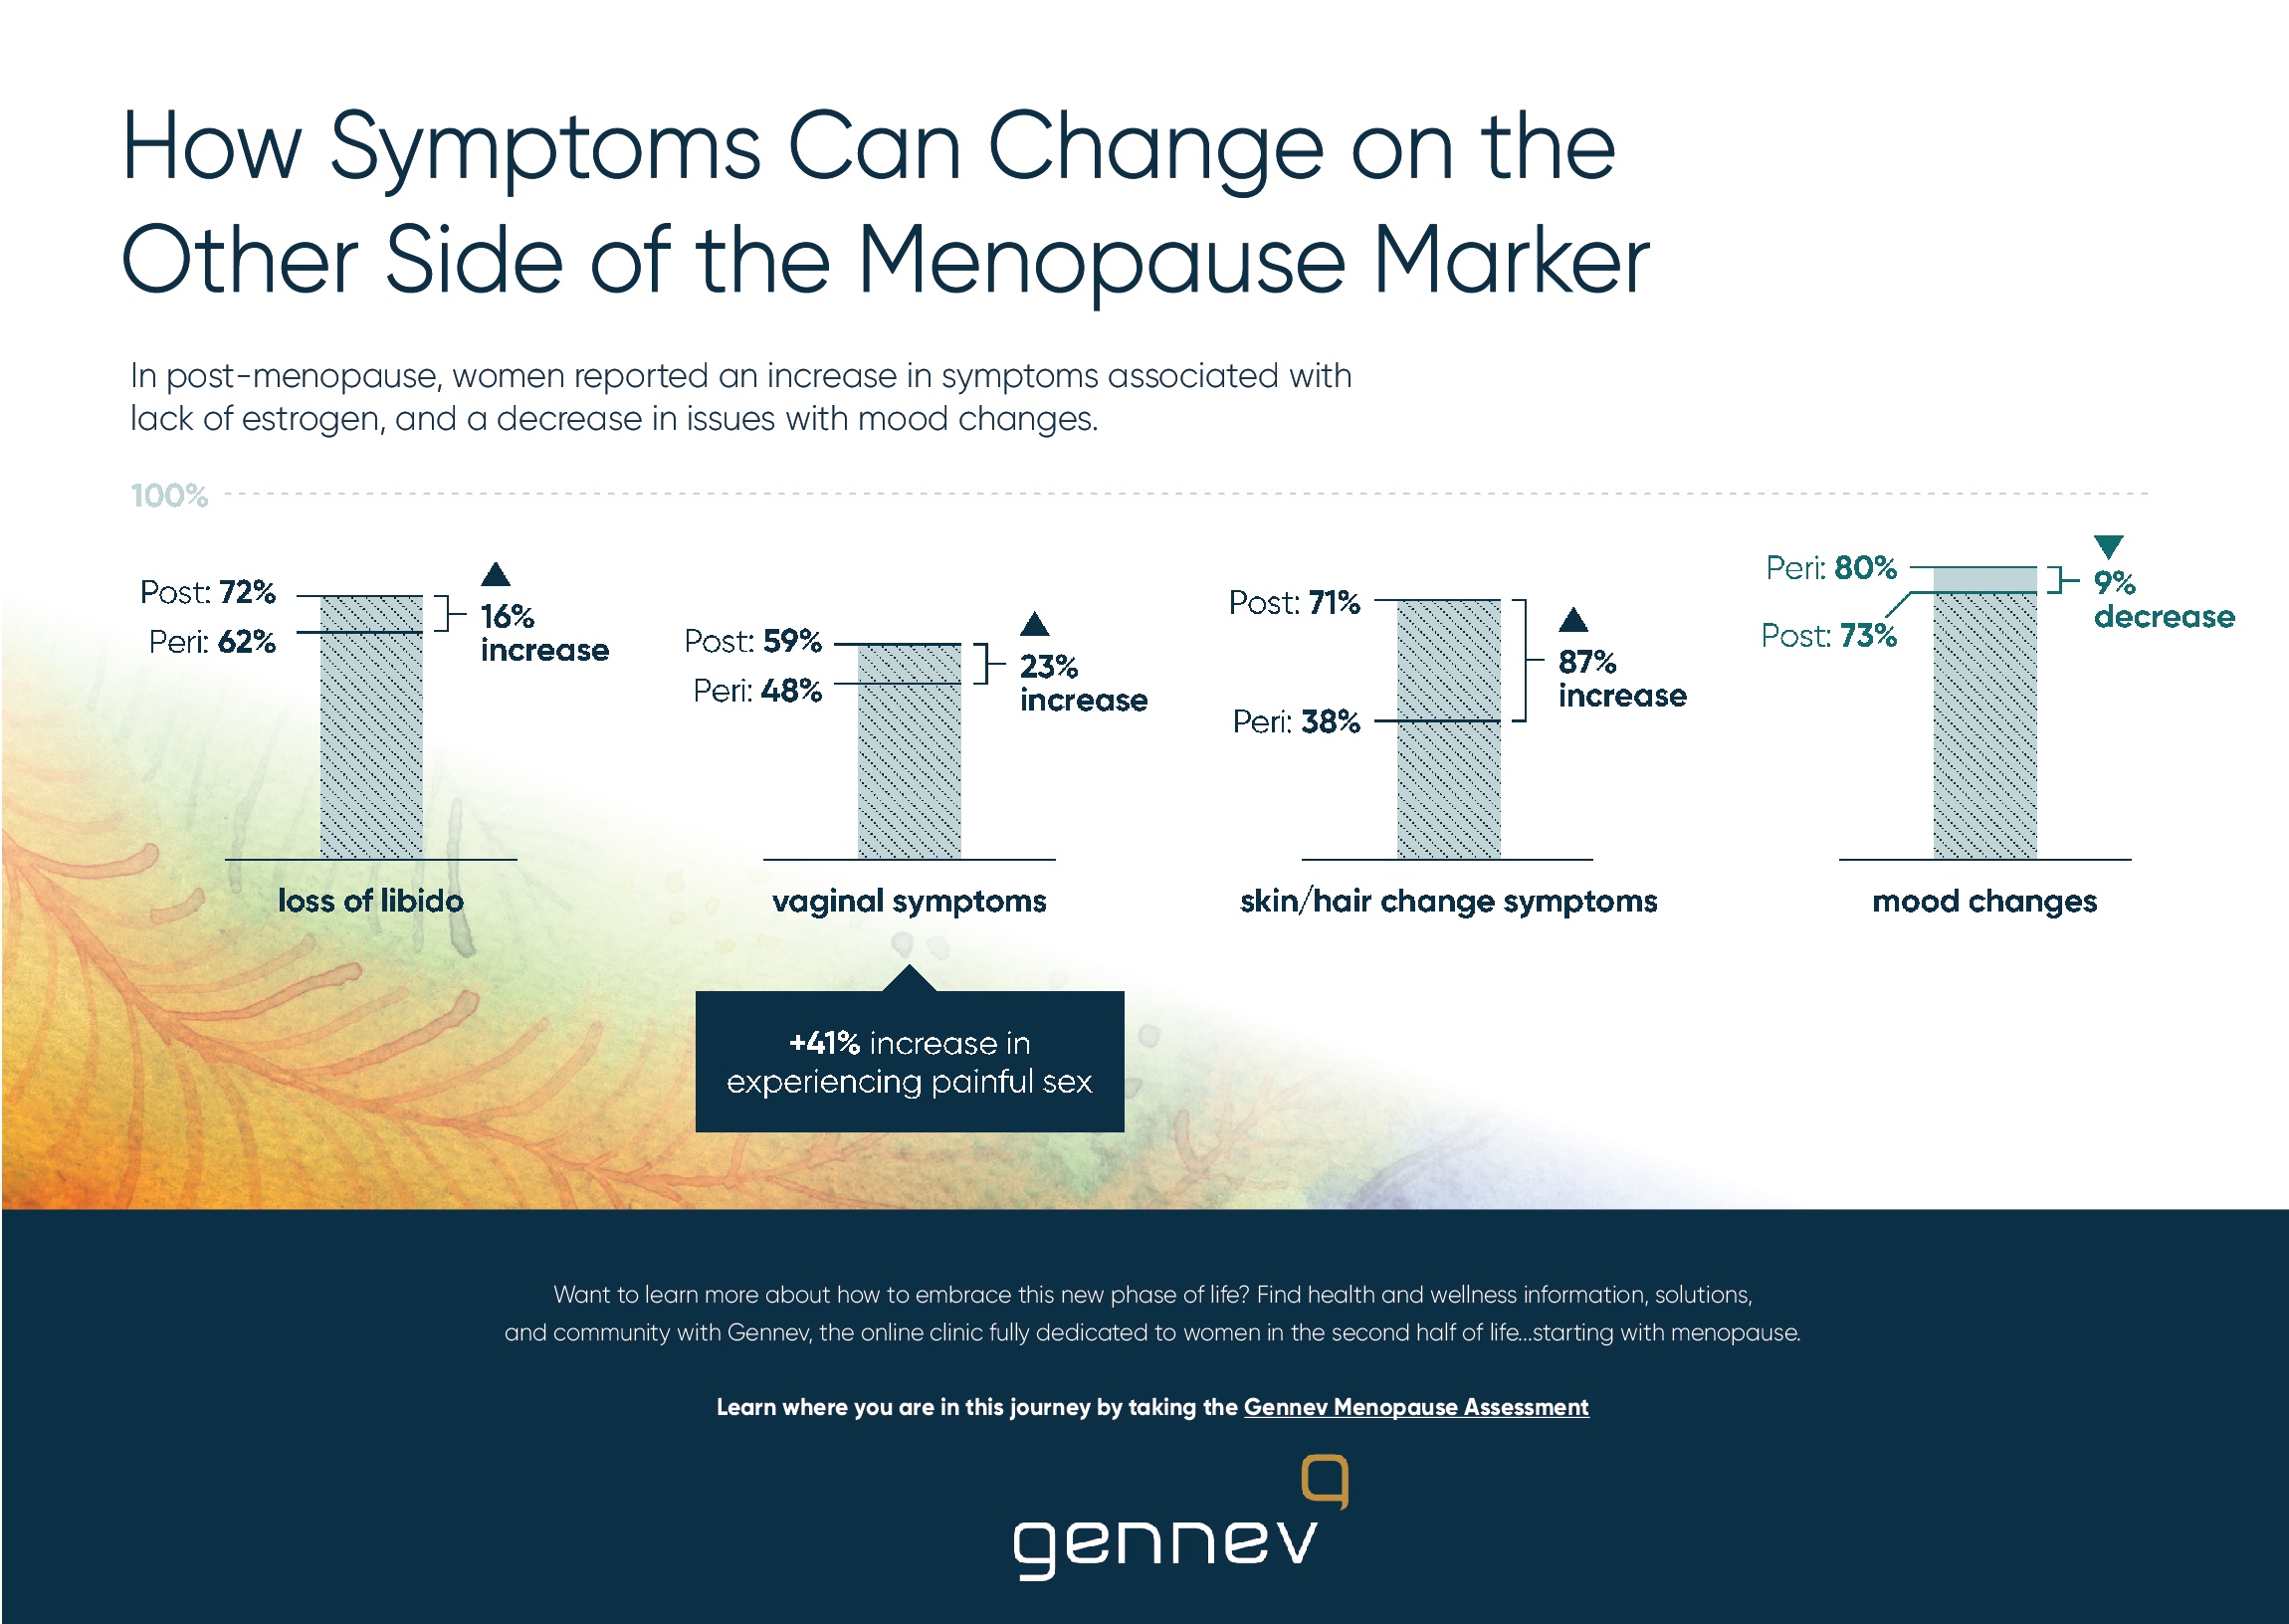 How Symptoms Change on the Other Side of the Menopause Marker